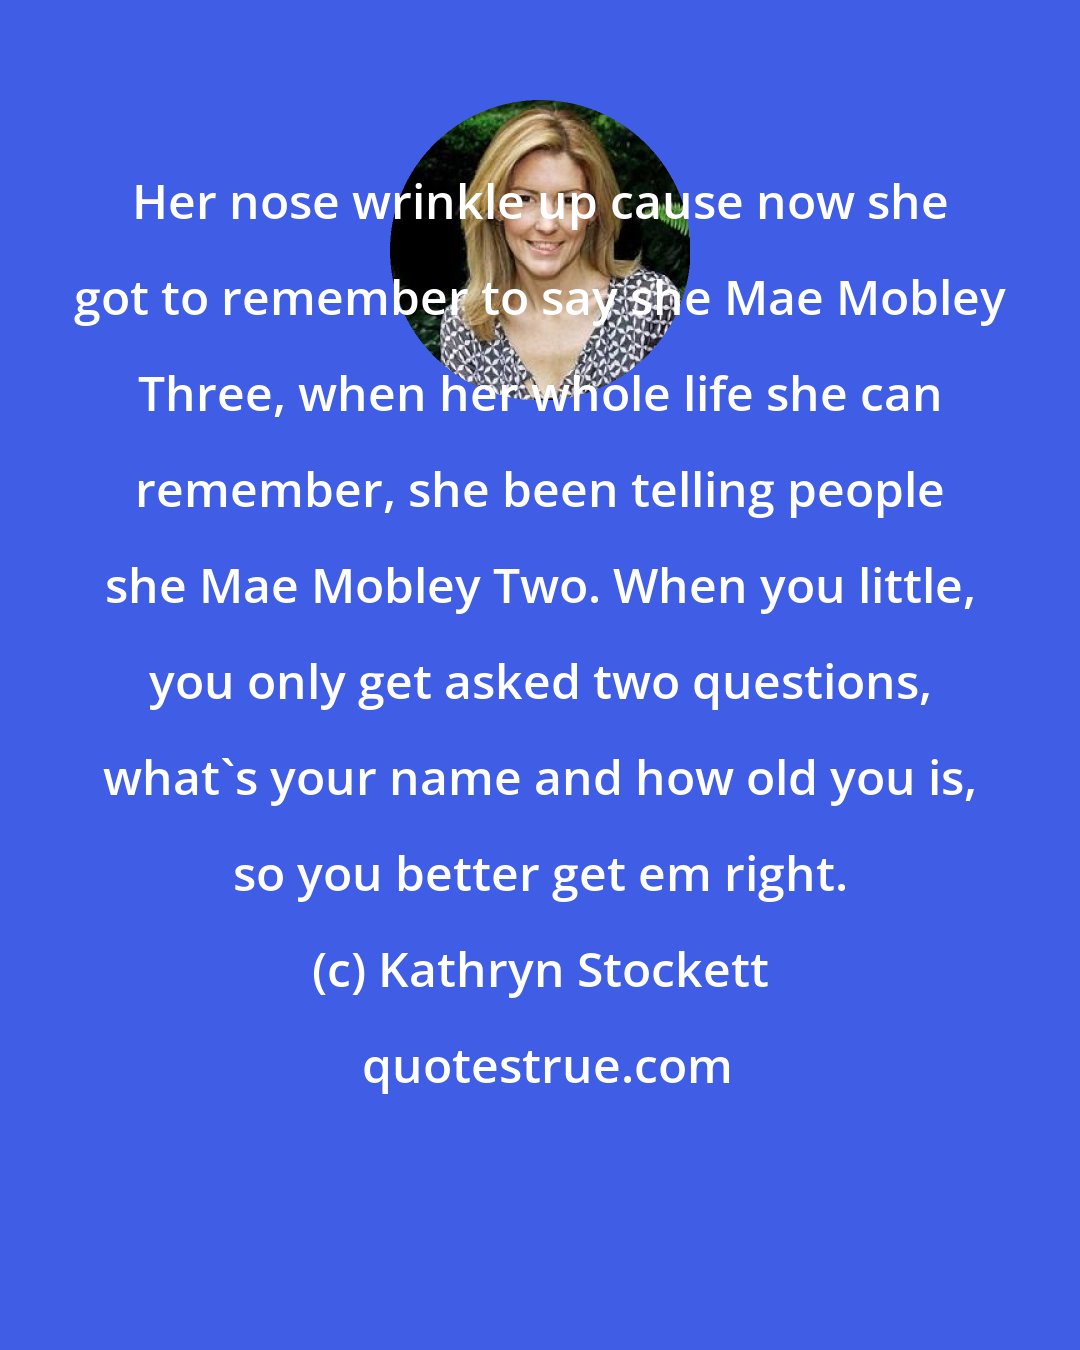 Kathryn Stockett: Her nose wrinkle up cause now she got to remember to say she Mae Mobley Three, when her whole life she can remember, she been telling people she Mae Mobley Two. When you little, you only get asked two questions, what's your name and how old you is, so you better get em right.